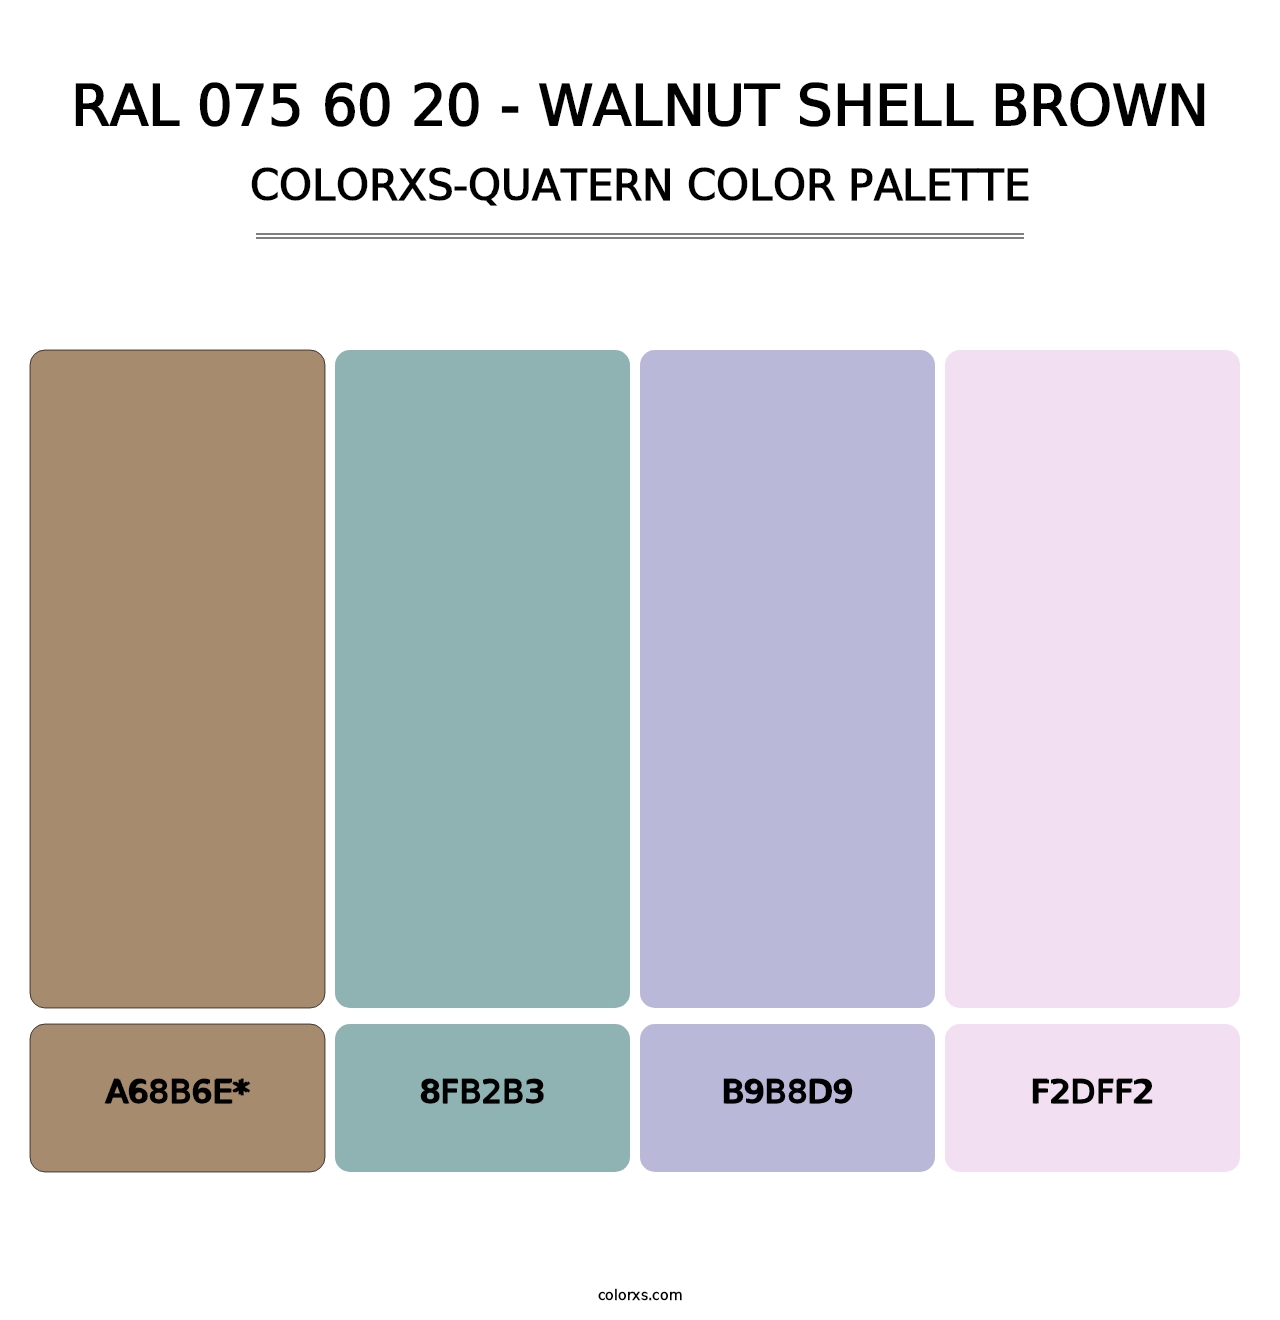 RAL 075 60 20 - Walnut Shell Brown - Colorxs Quatern Palette